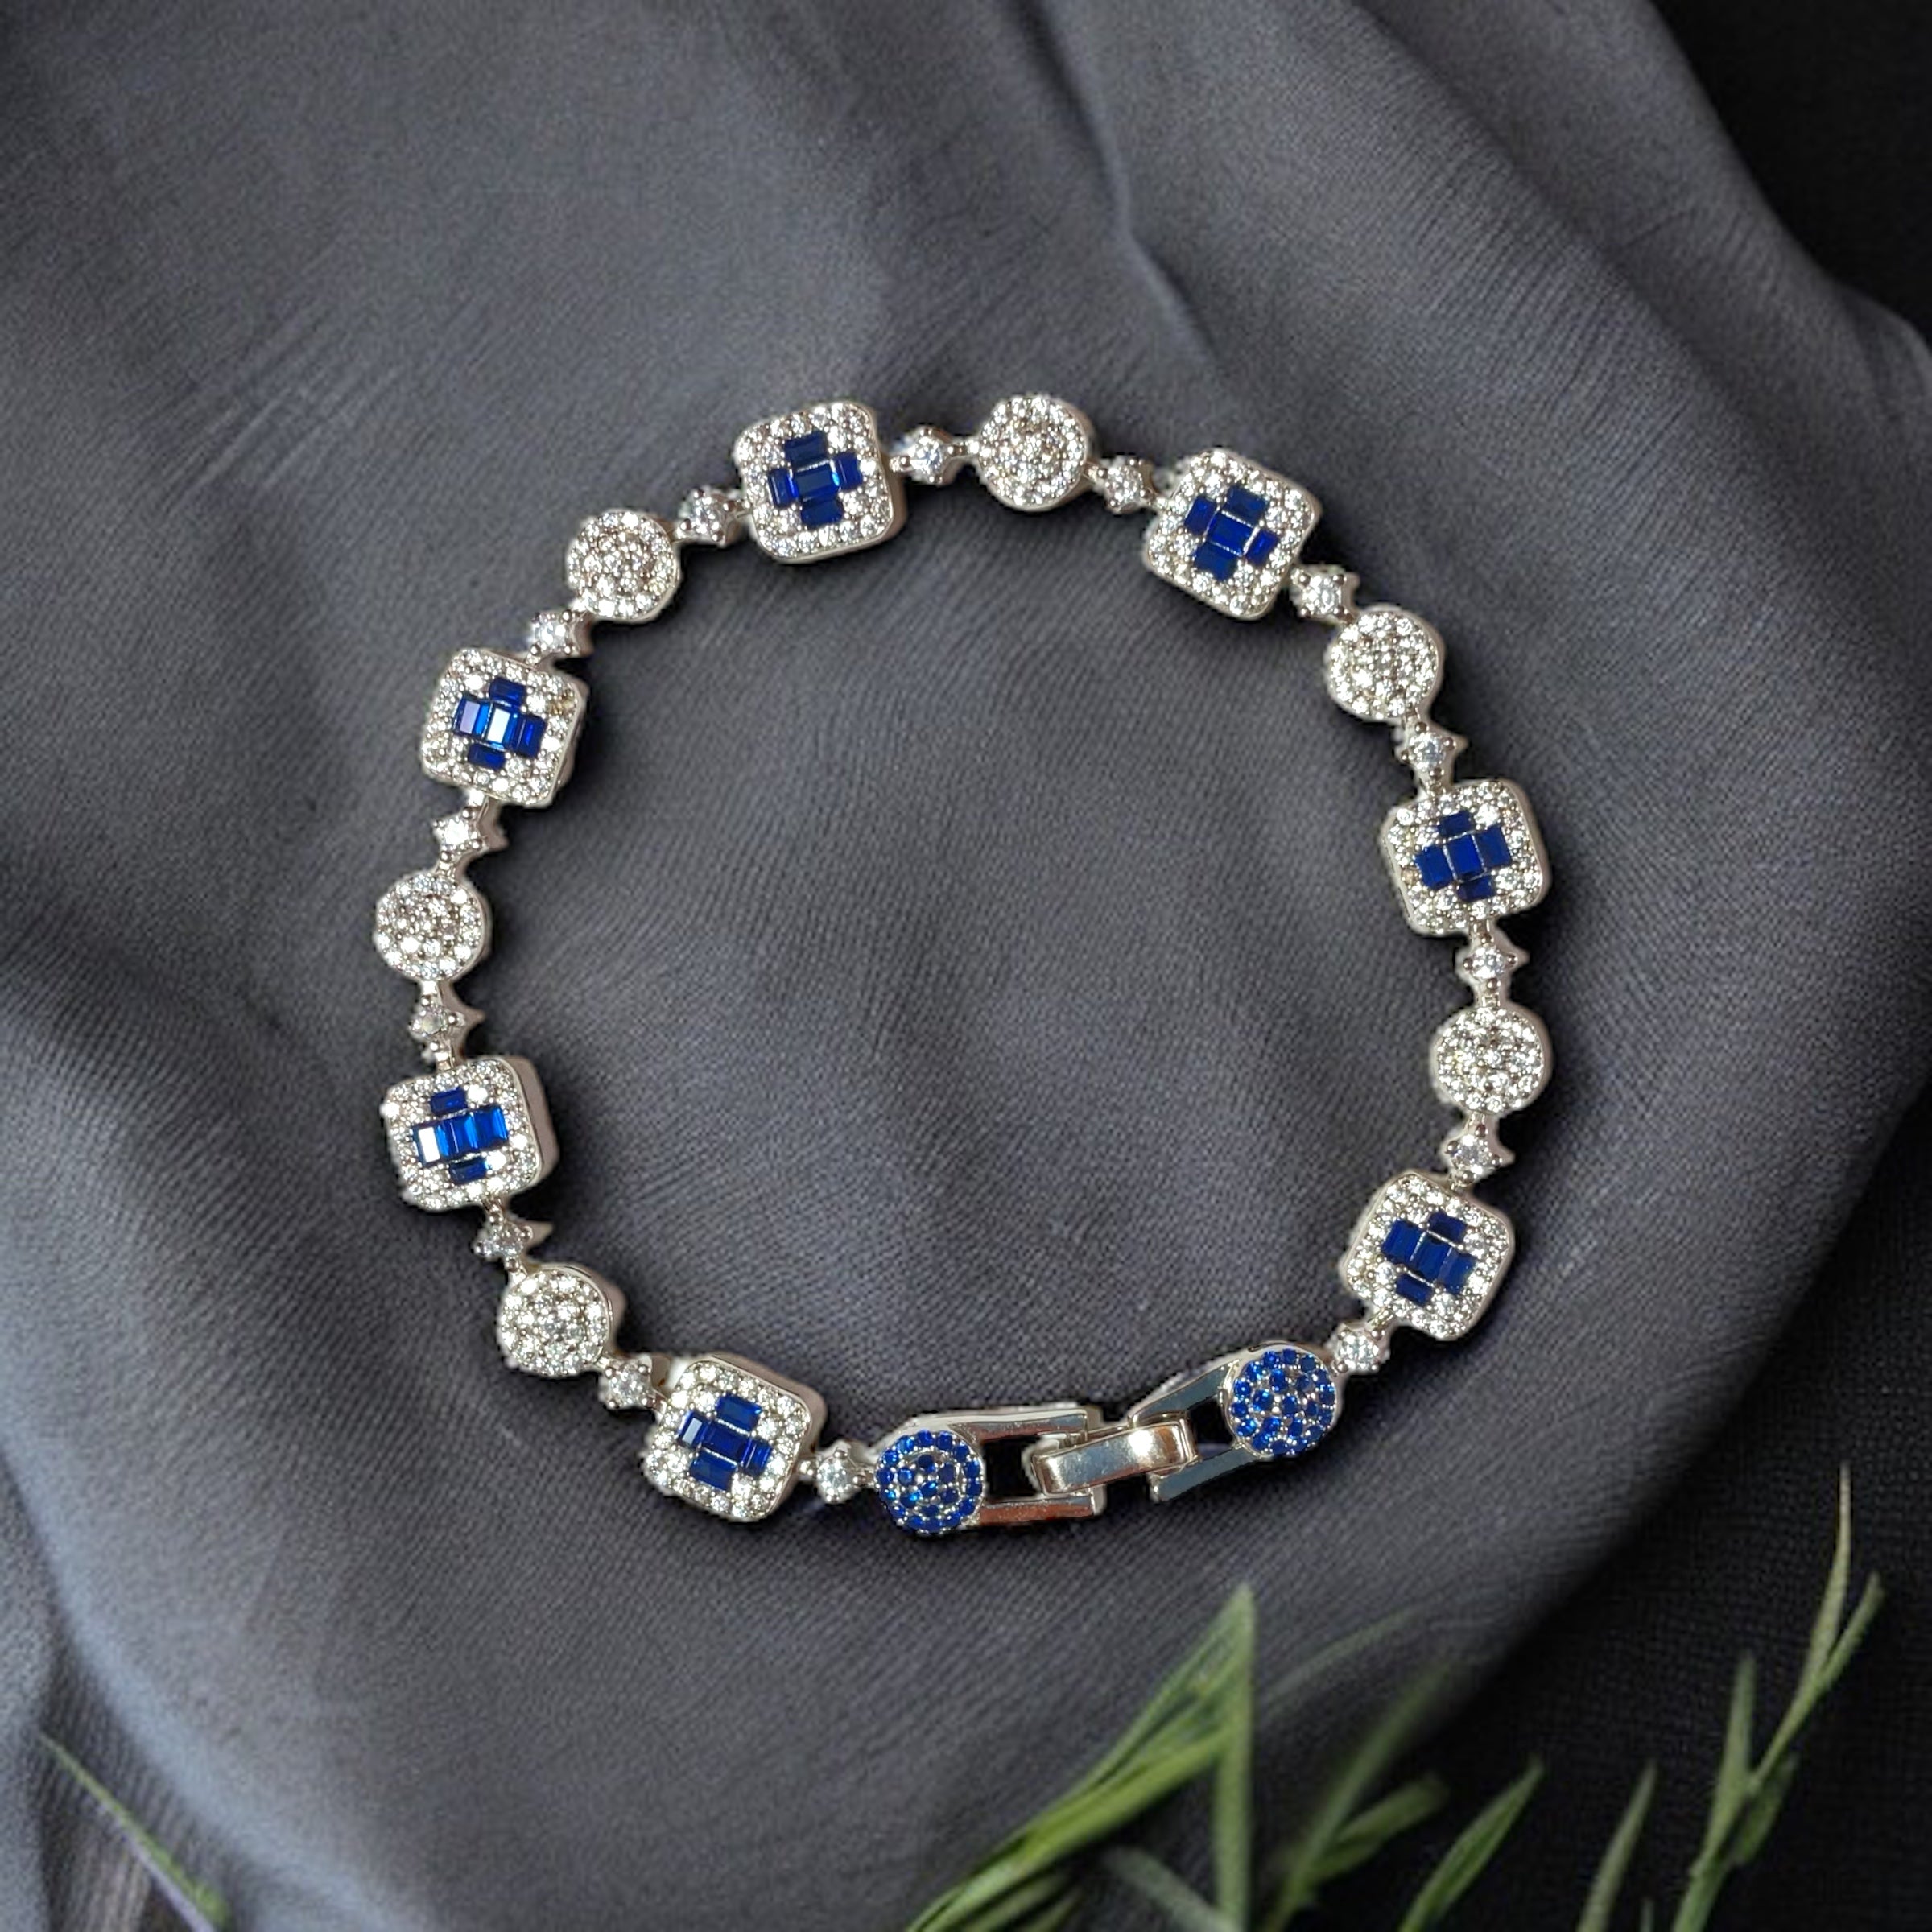 a bracelet with blue and white stones on it